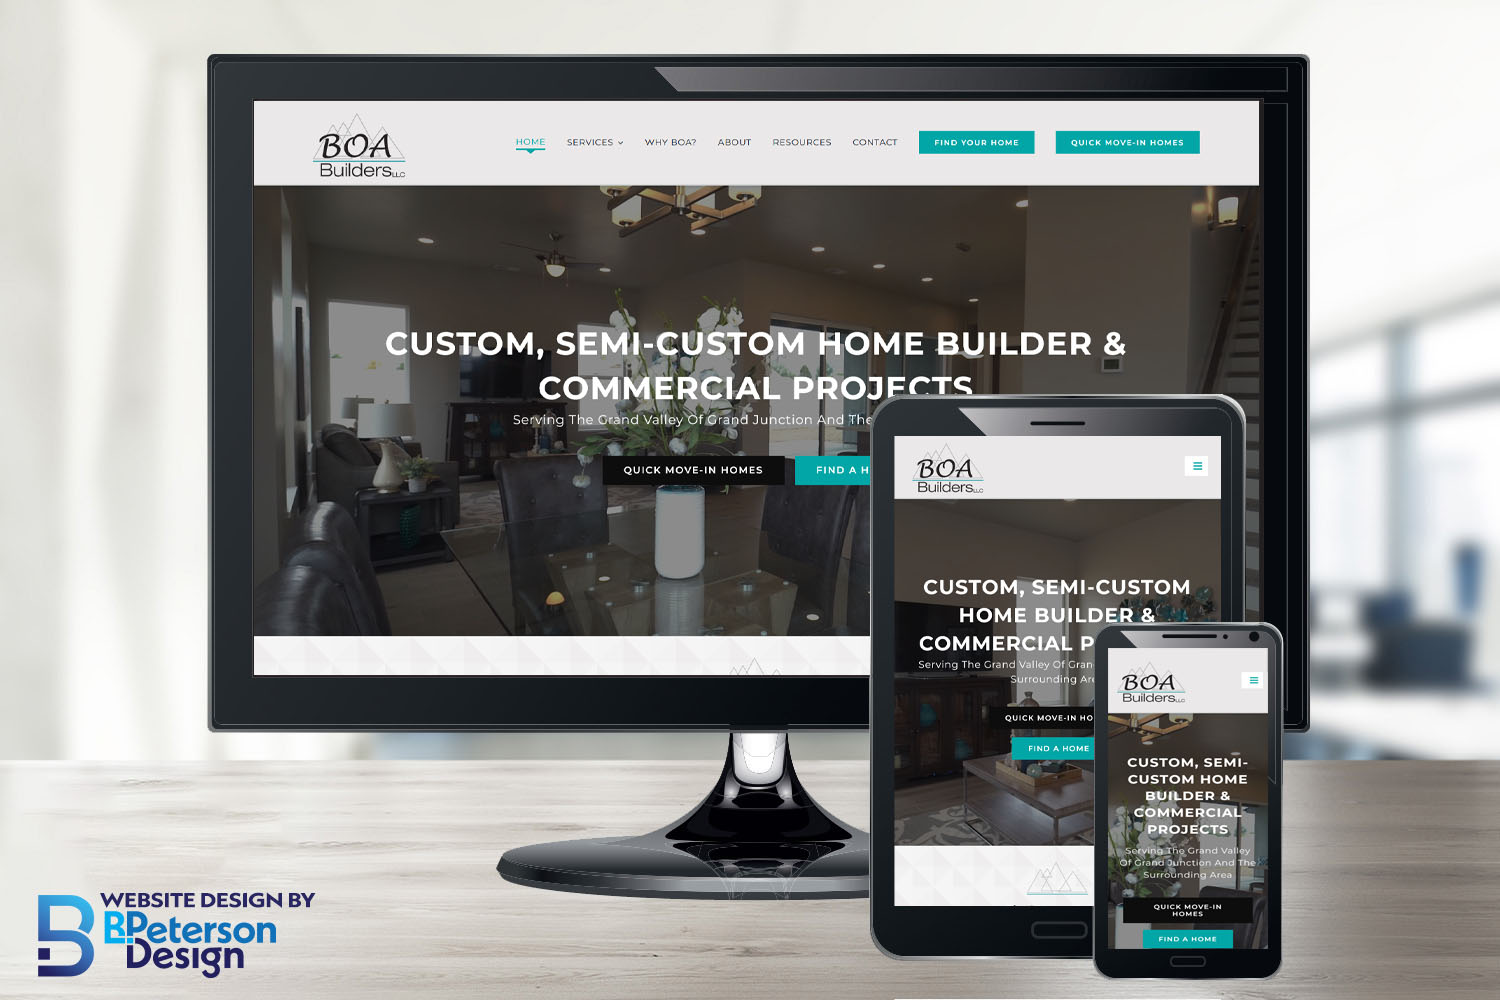 Website redesign for BOA Builders shown on different devices